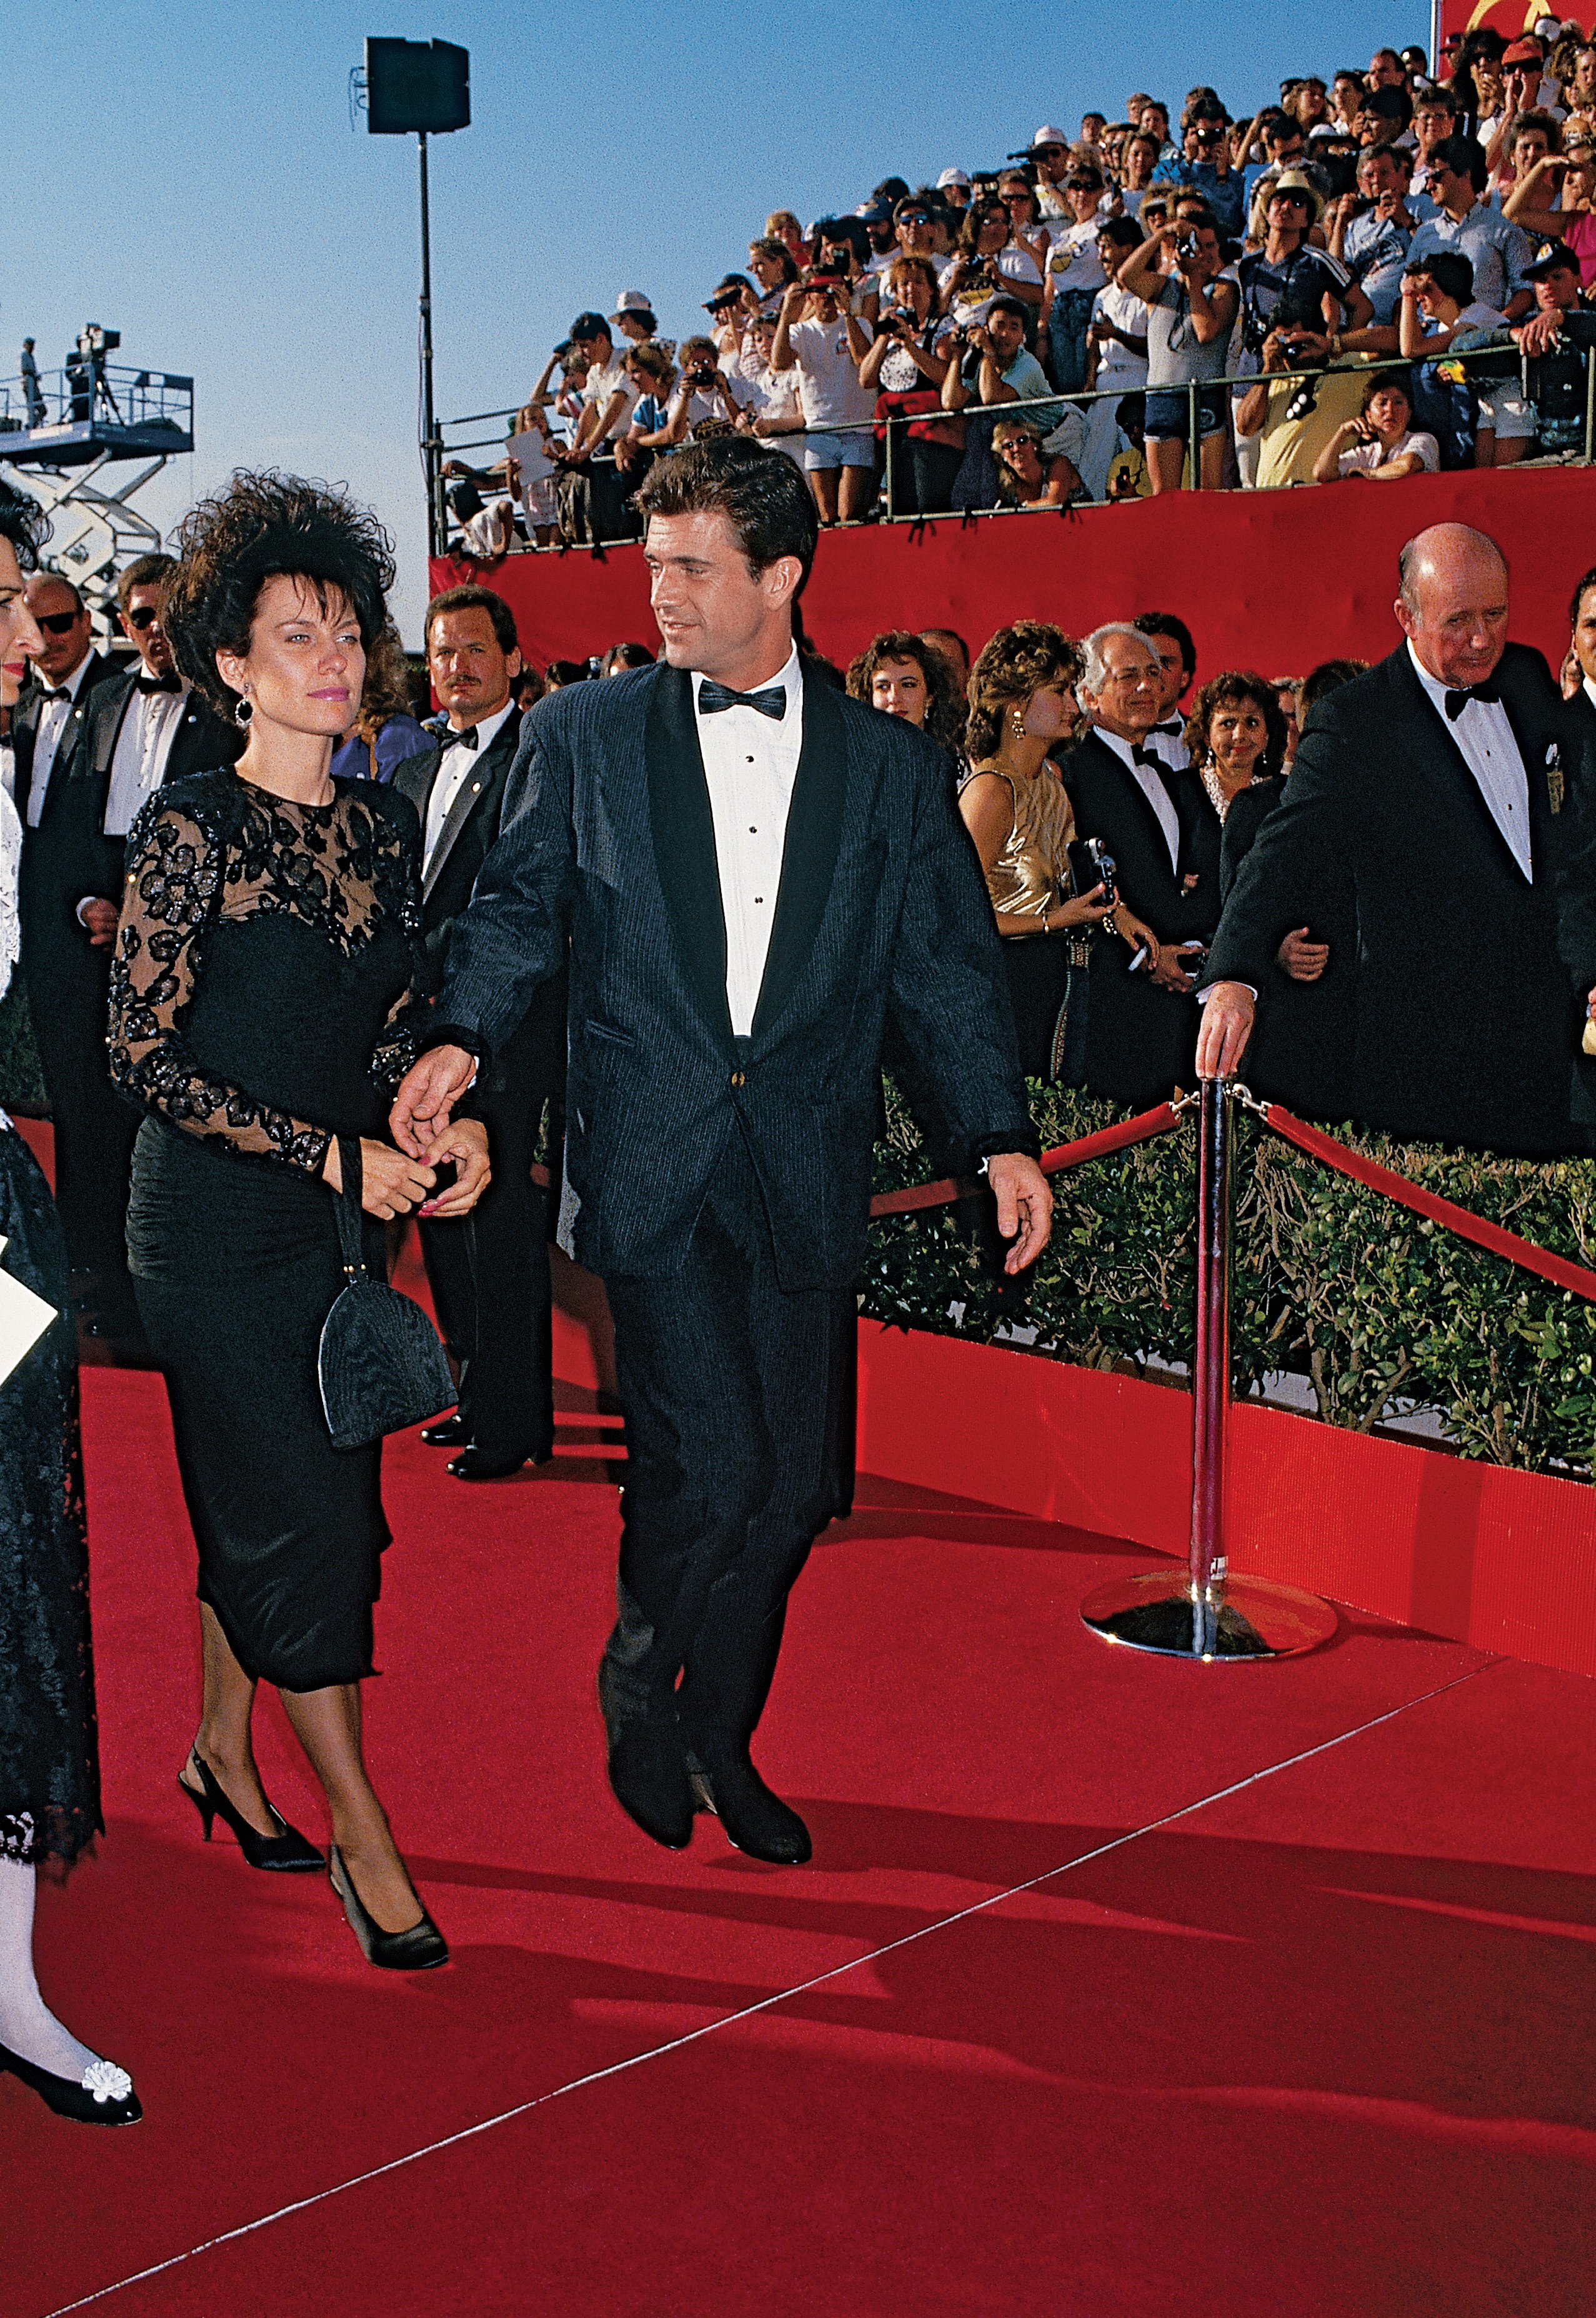 Screenwriter Mel Gibson and his wife Robyn Moore arriving at the 1988 Academy Awards. / Source: Getty Images